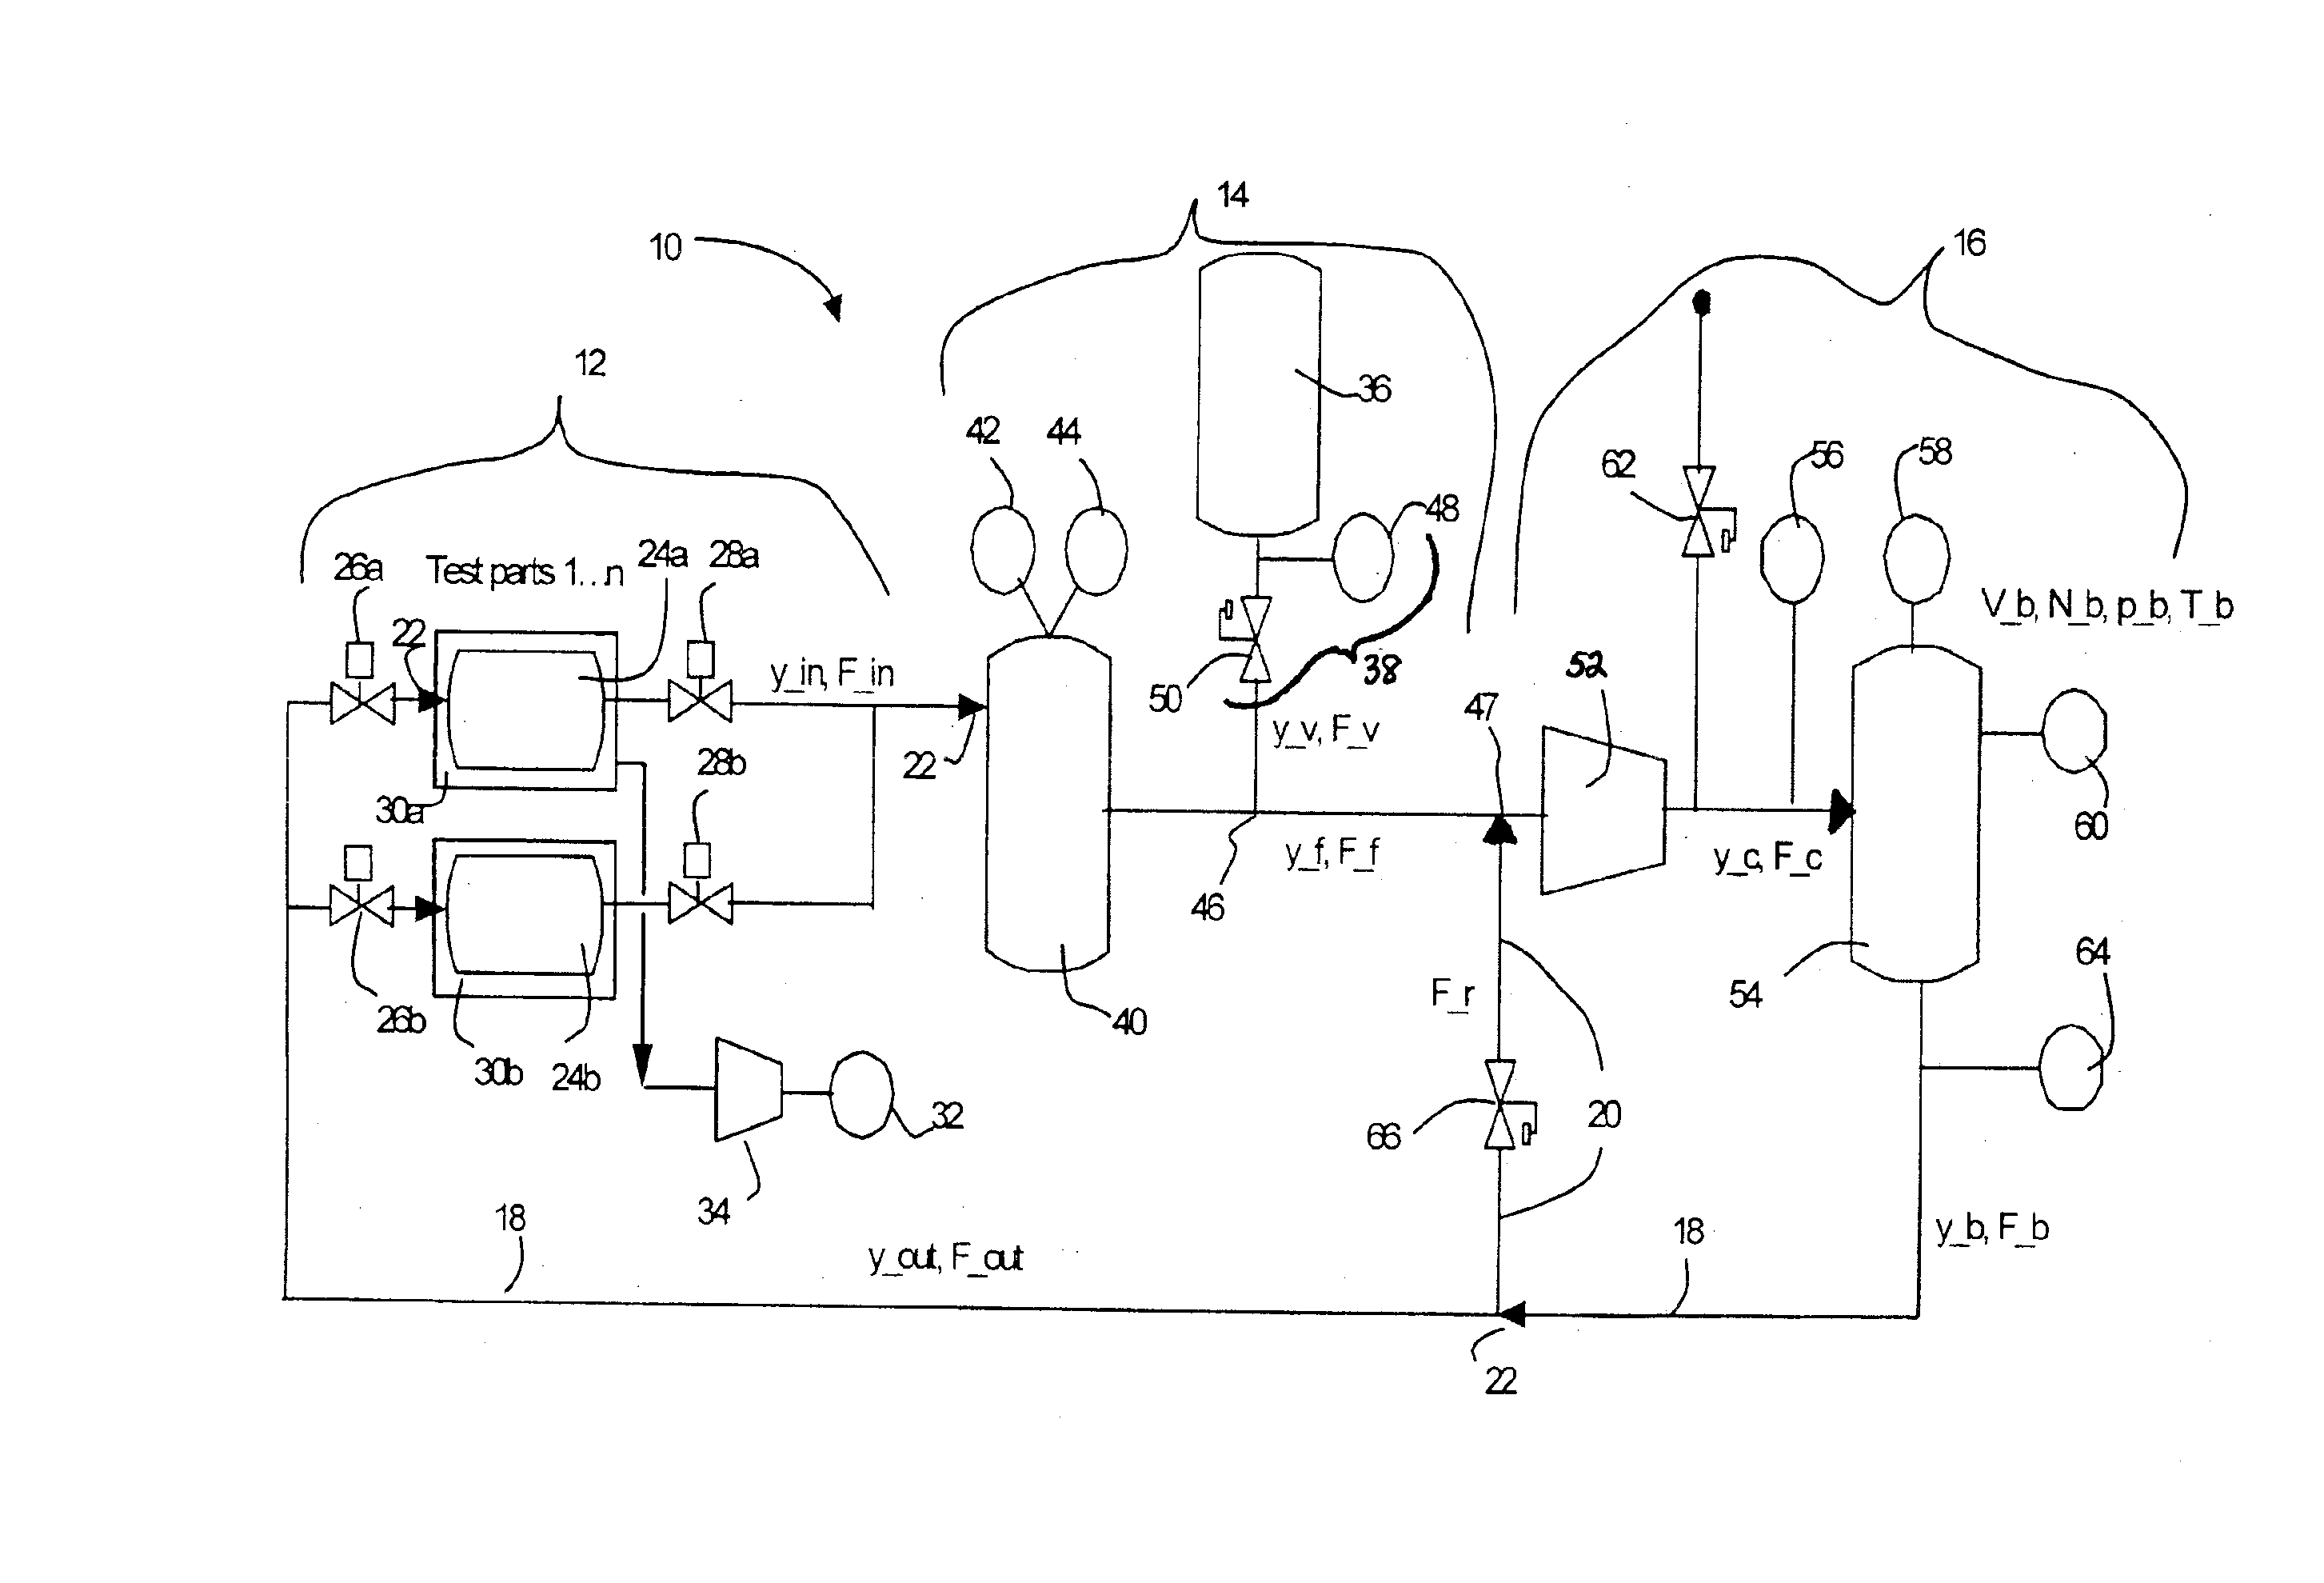 Apparatus and method for recovery and recycle of tracer gas from leak testing process with randomly varying demand